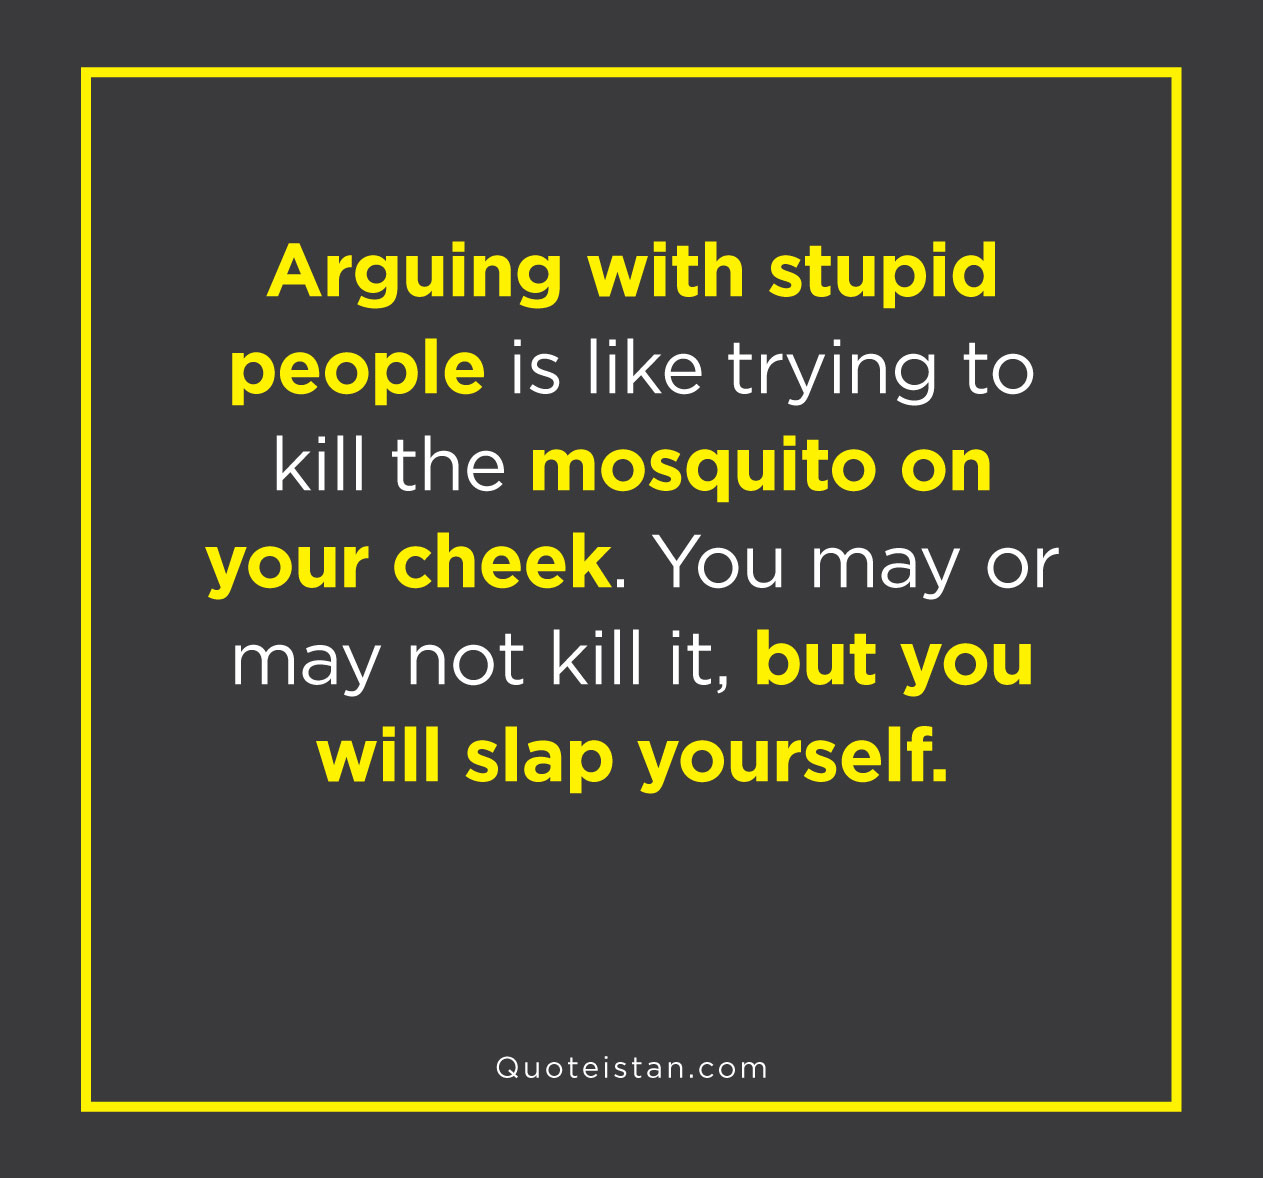 arguing with stupid people is like killing - Arguing with stupid people is trying to kill the mosquito on your cheek. You may or may not kill it, but you will slap yourself. Quoteistan.com